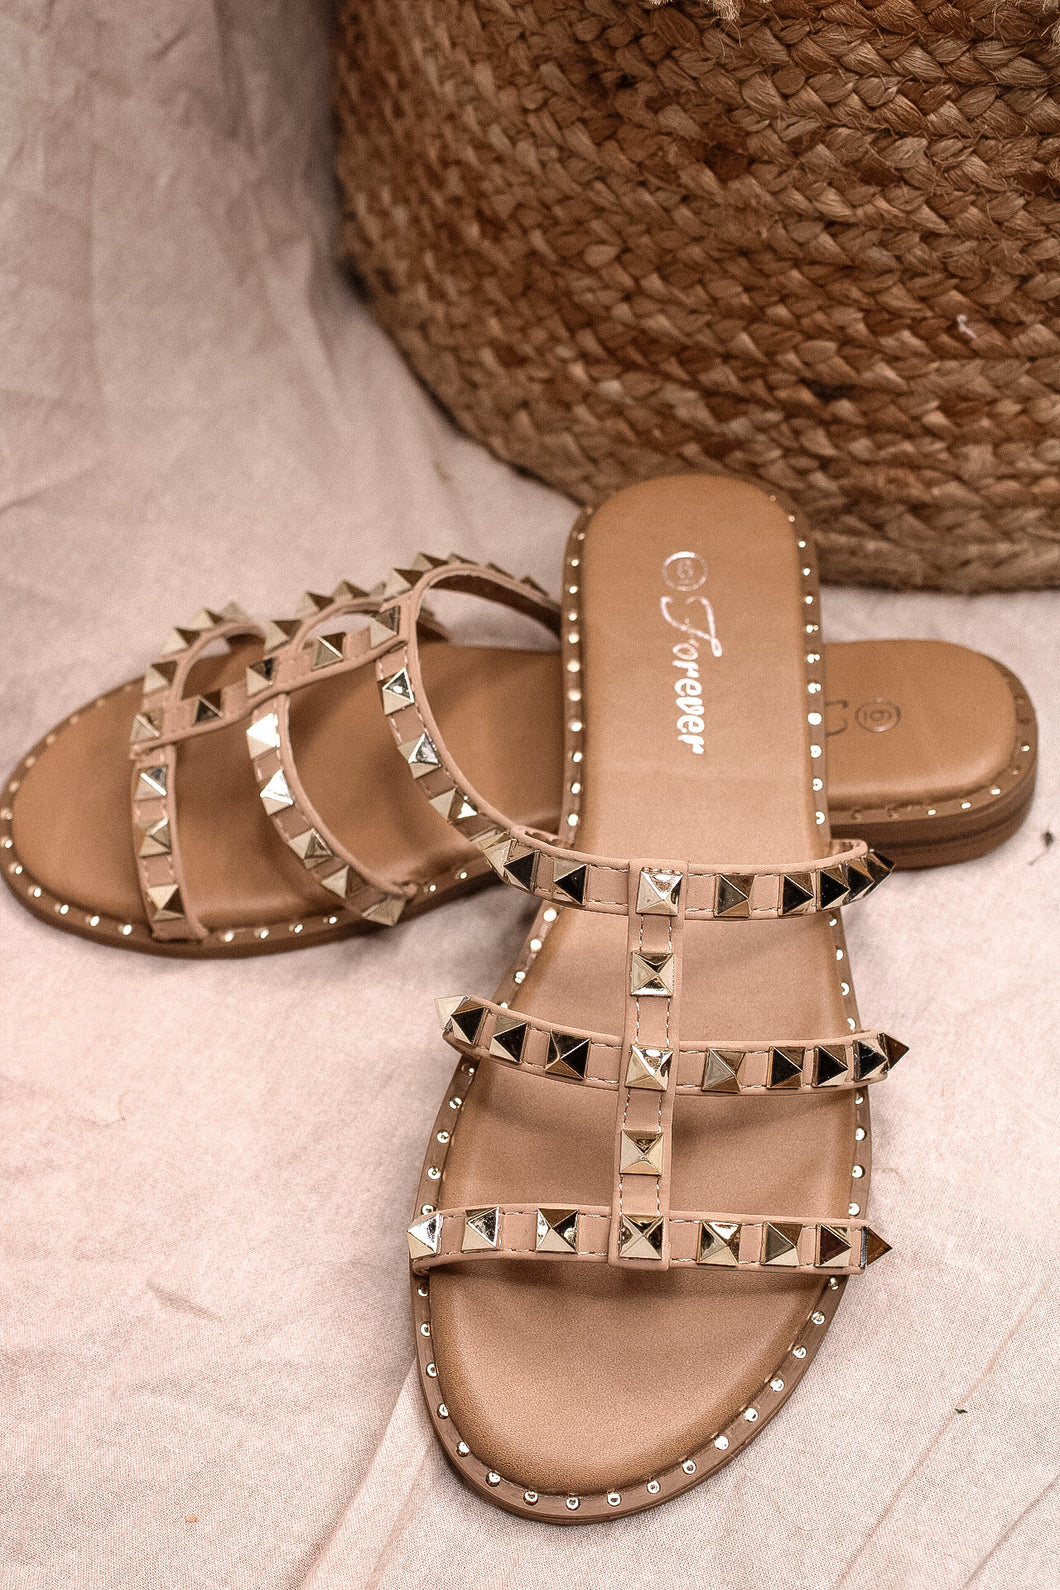 A Chic Lifestyle, Studded Sandals